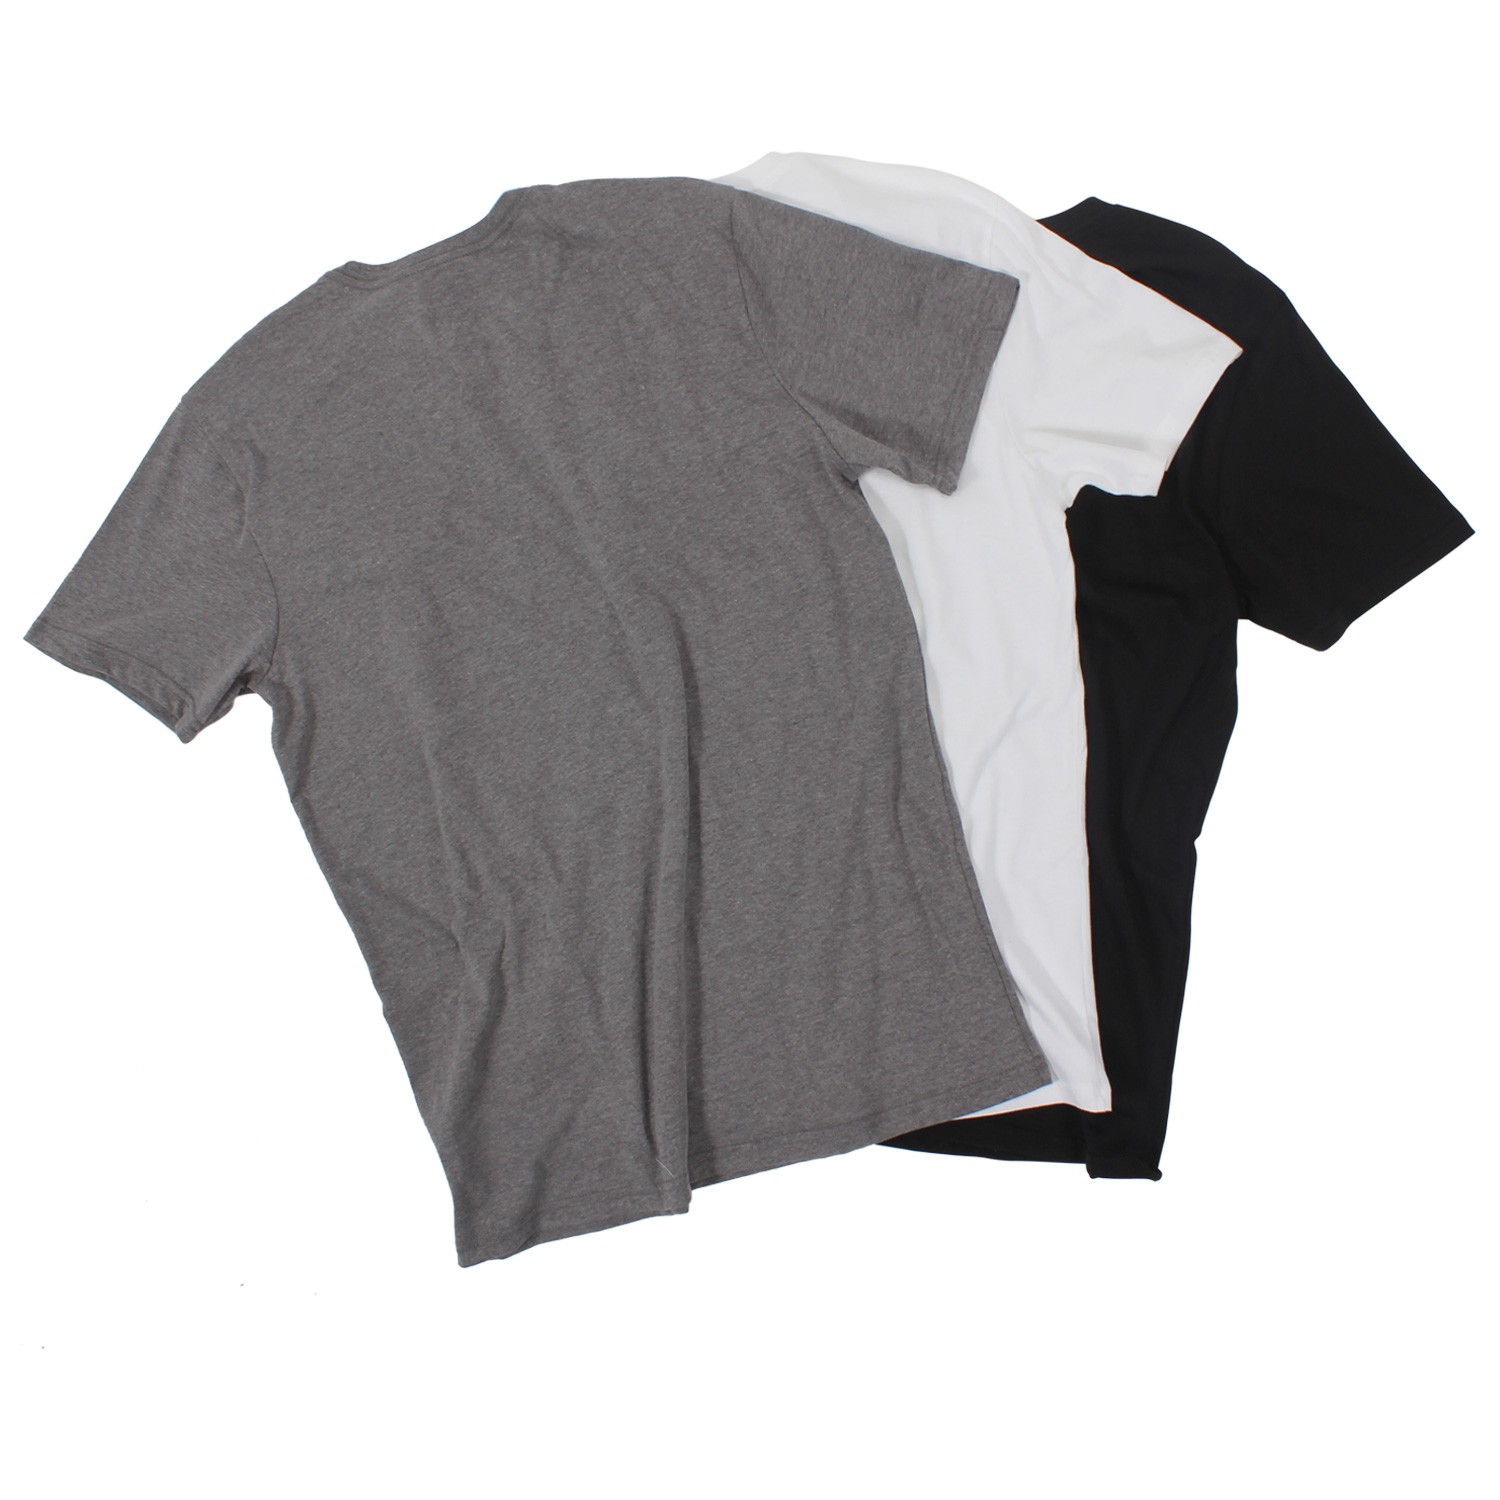 Huf 3 Pack Blank T-Shirts Assorted